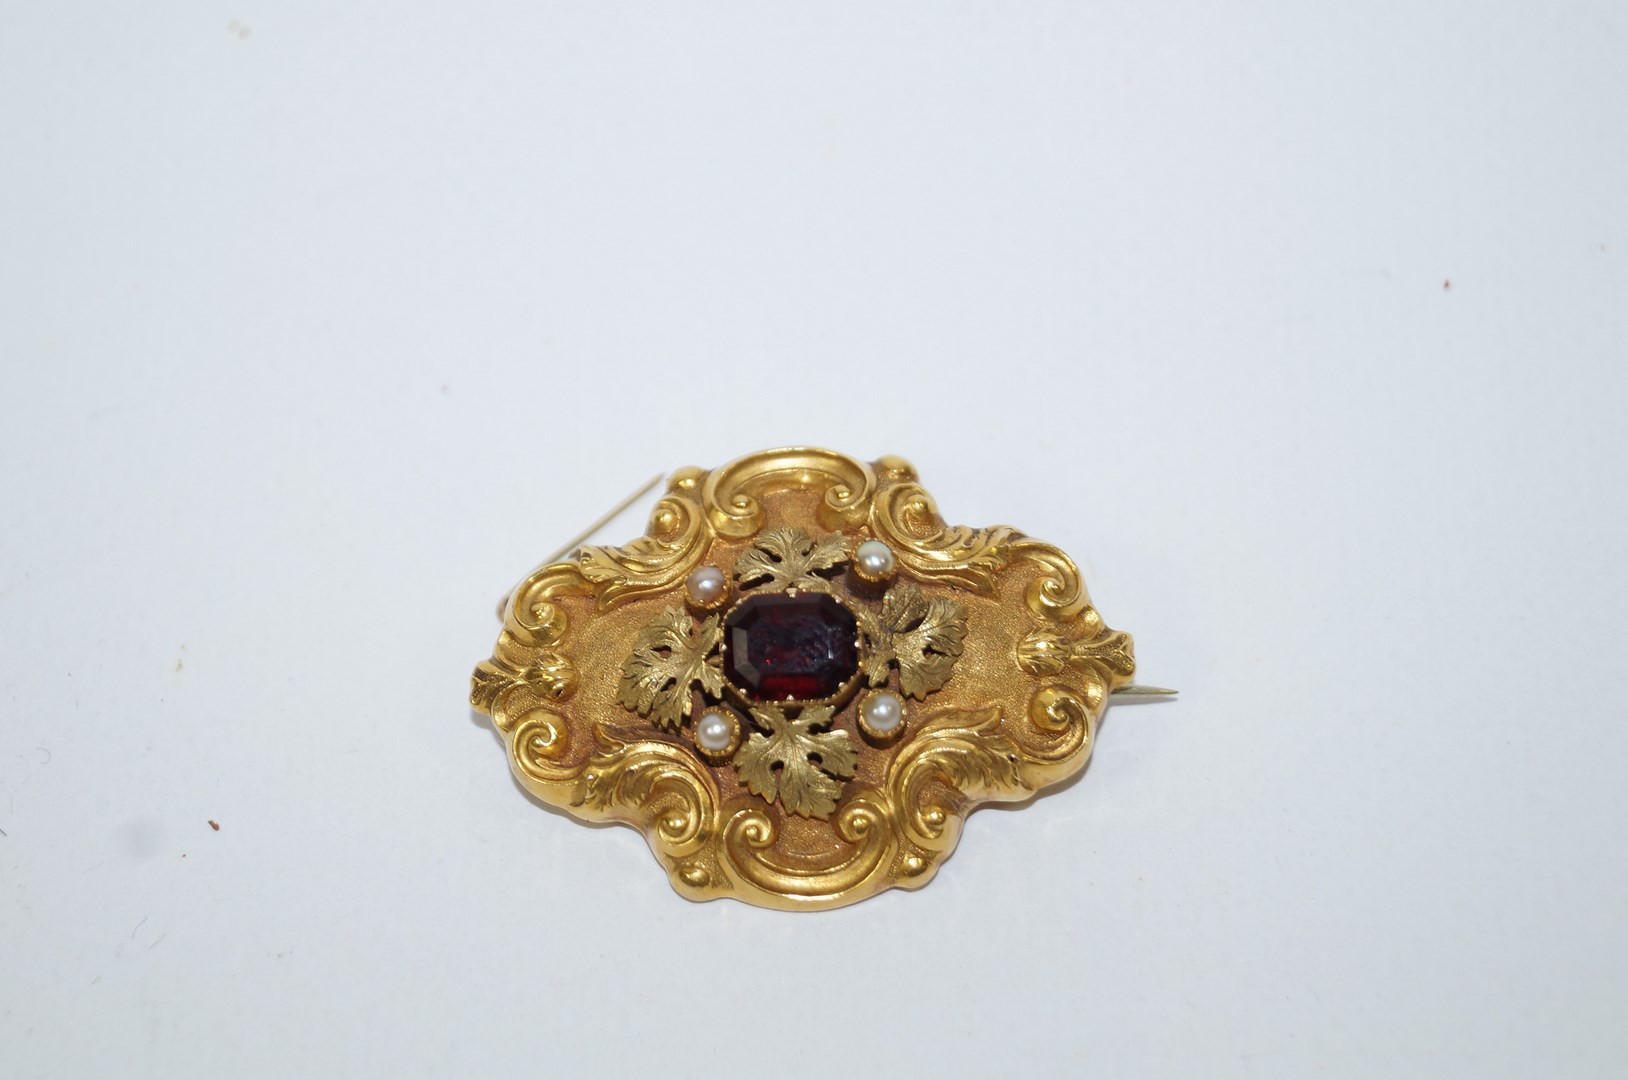 A Victorian gold, simulated pearl and garnet brooch, locket back, 4.6 cm long, 12.